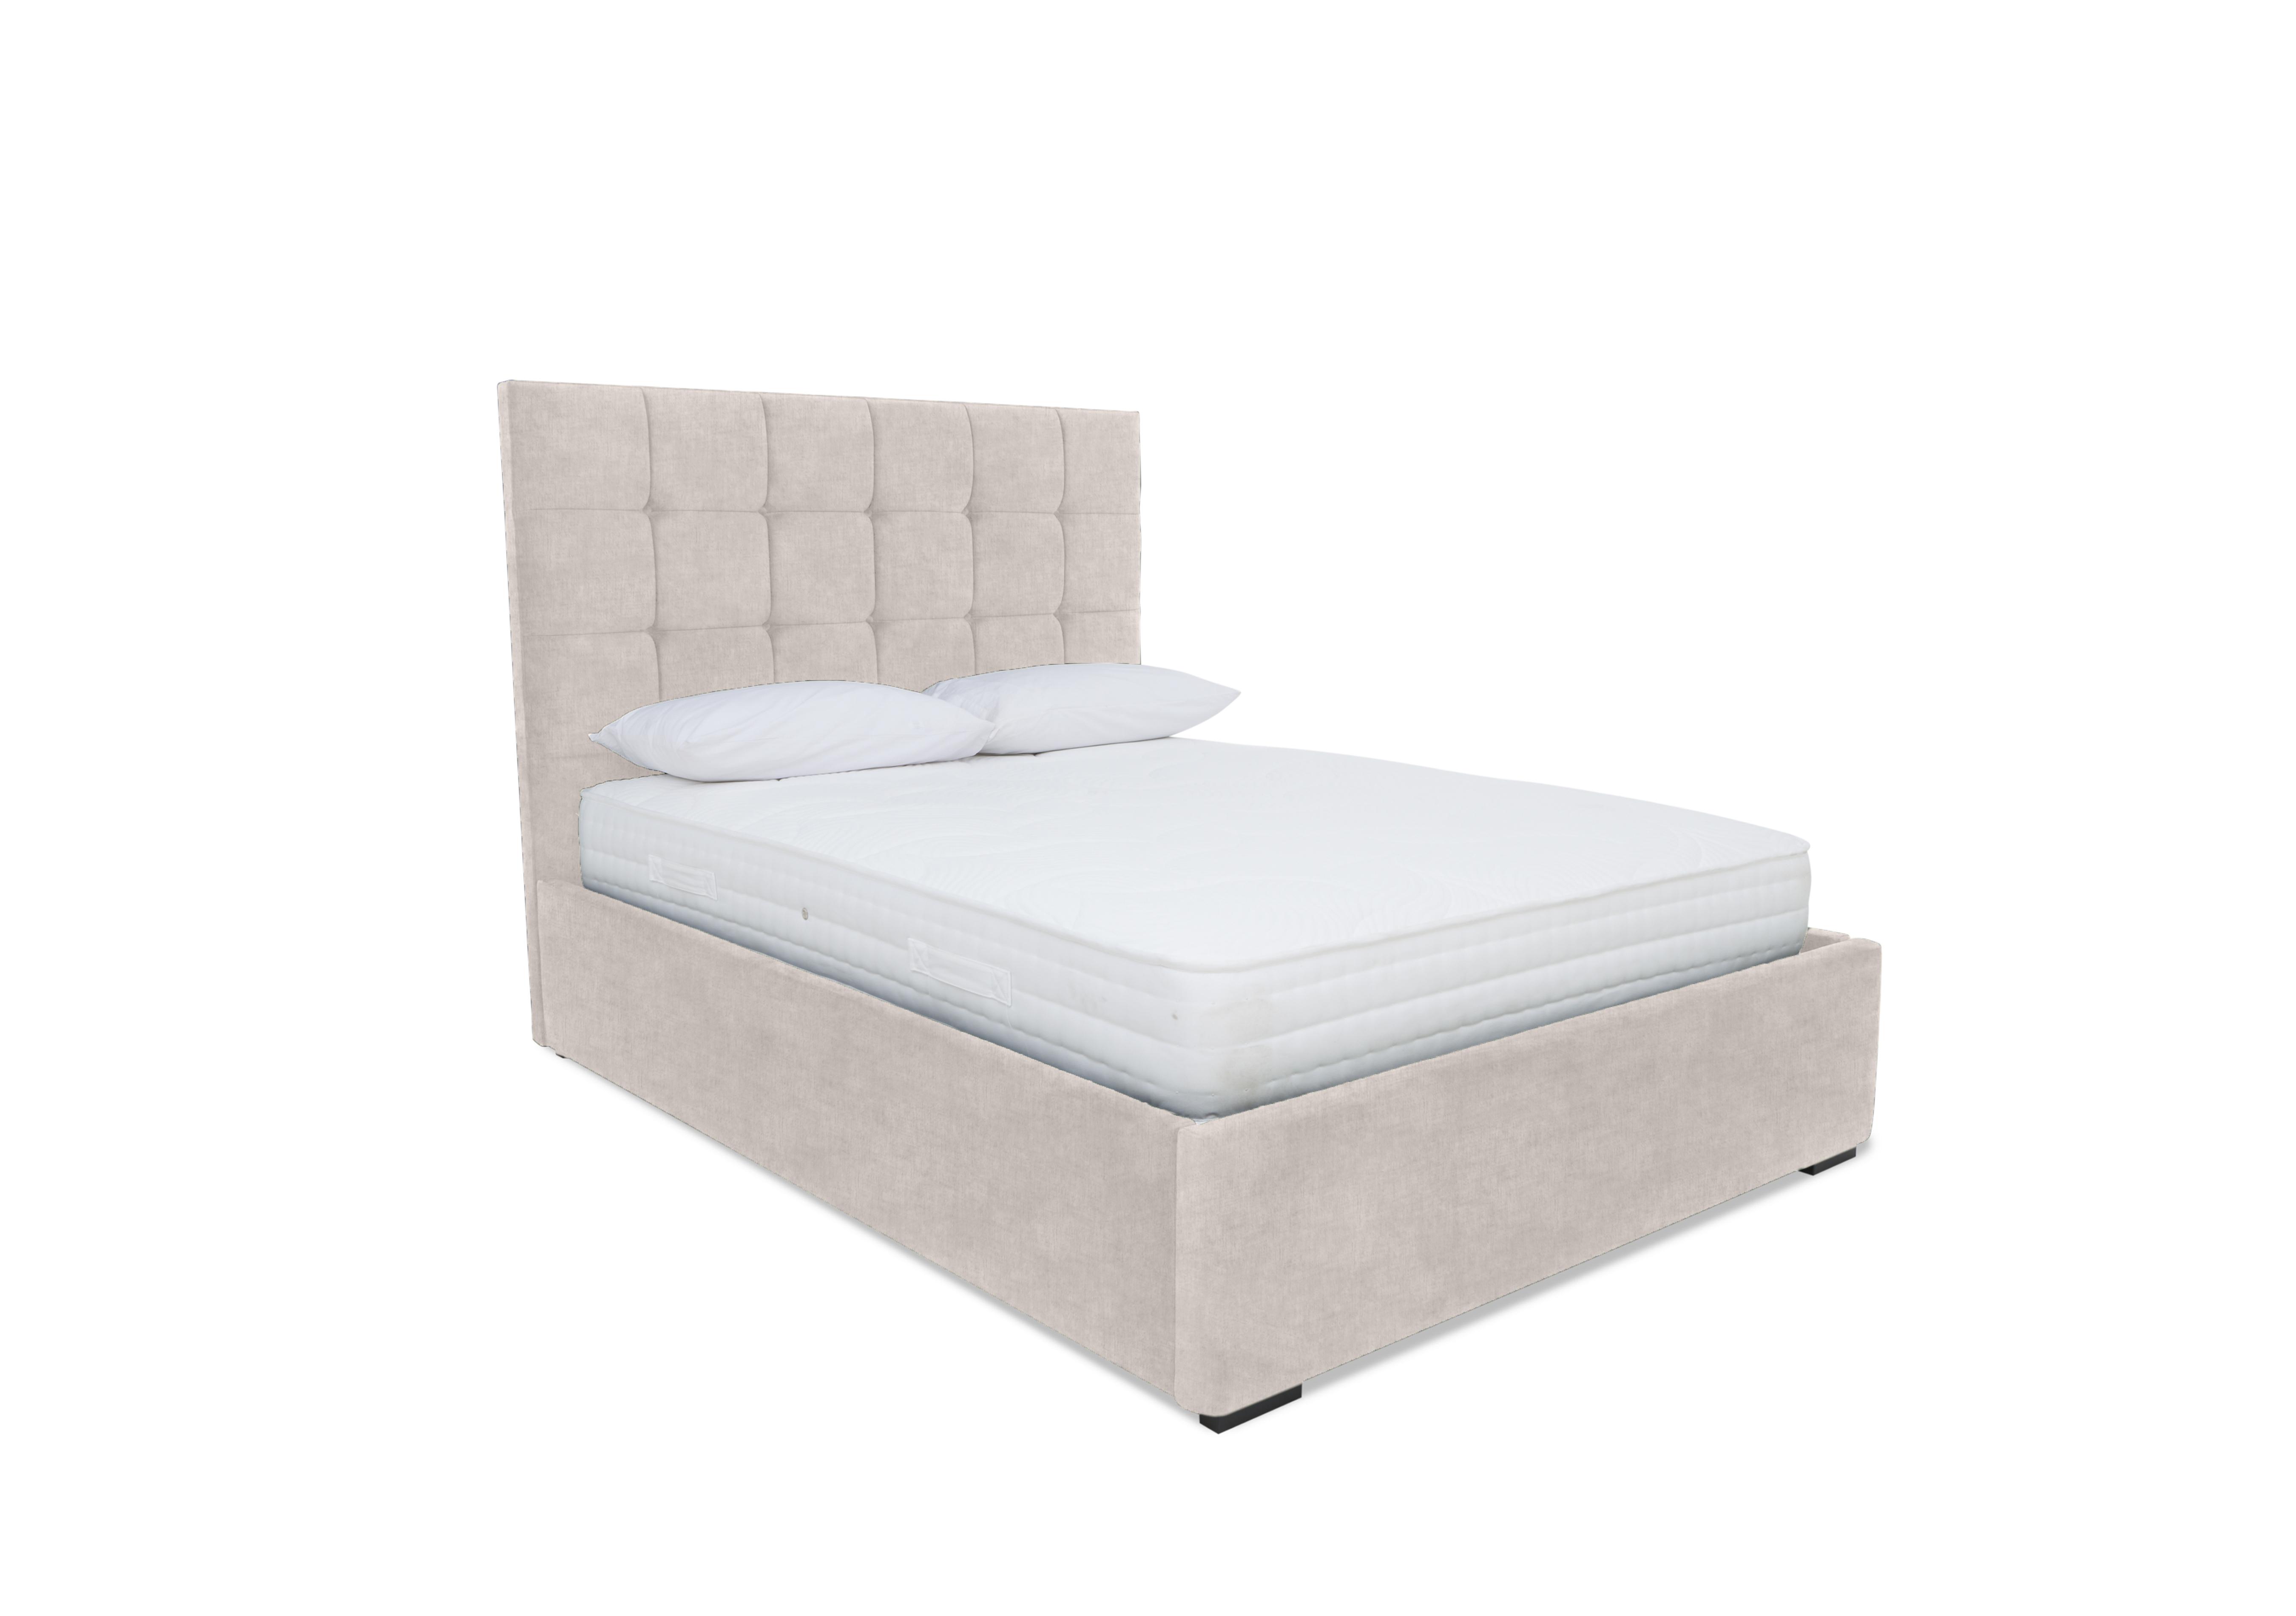 Milne Electric Ottoman Bed Frame in Lace Ivory on Furniture Village